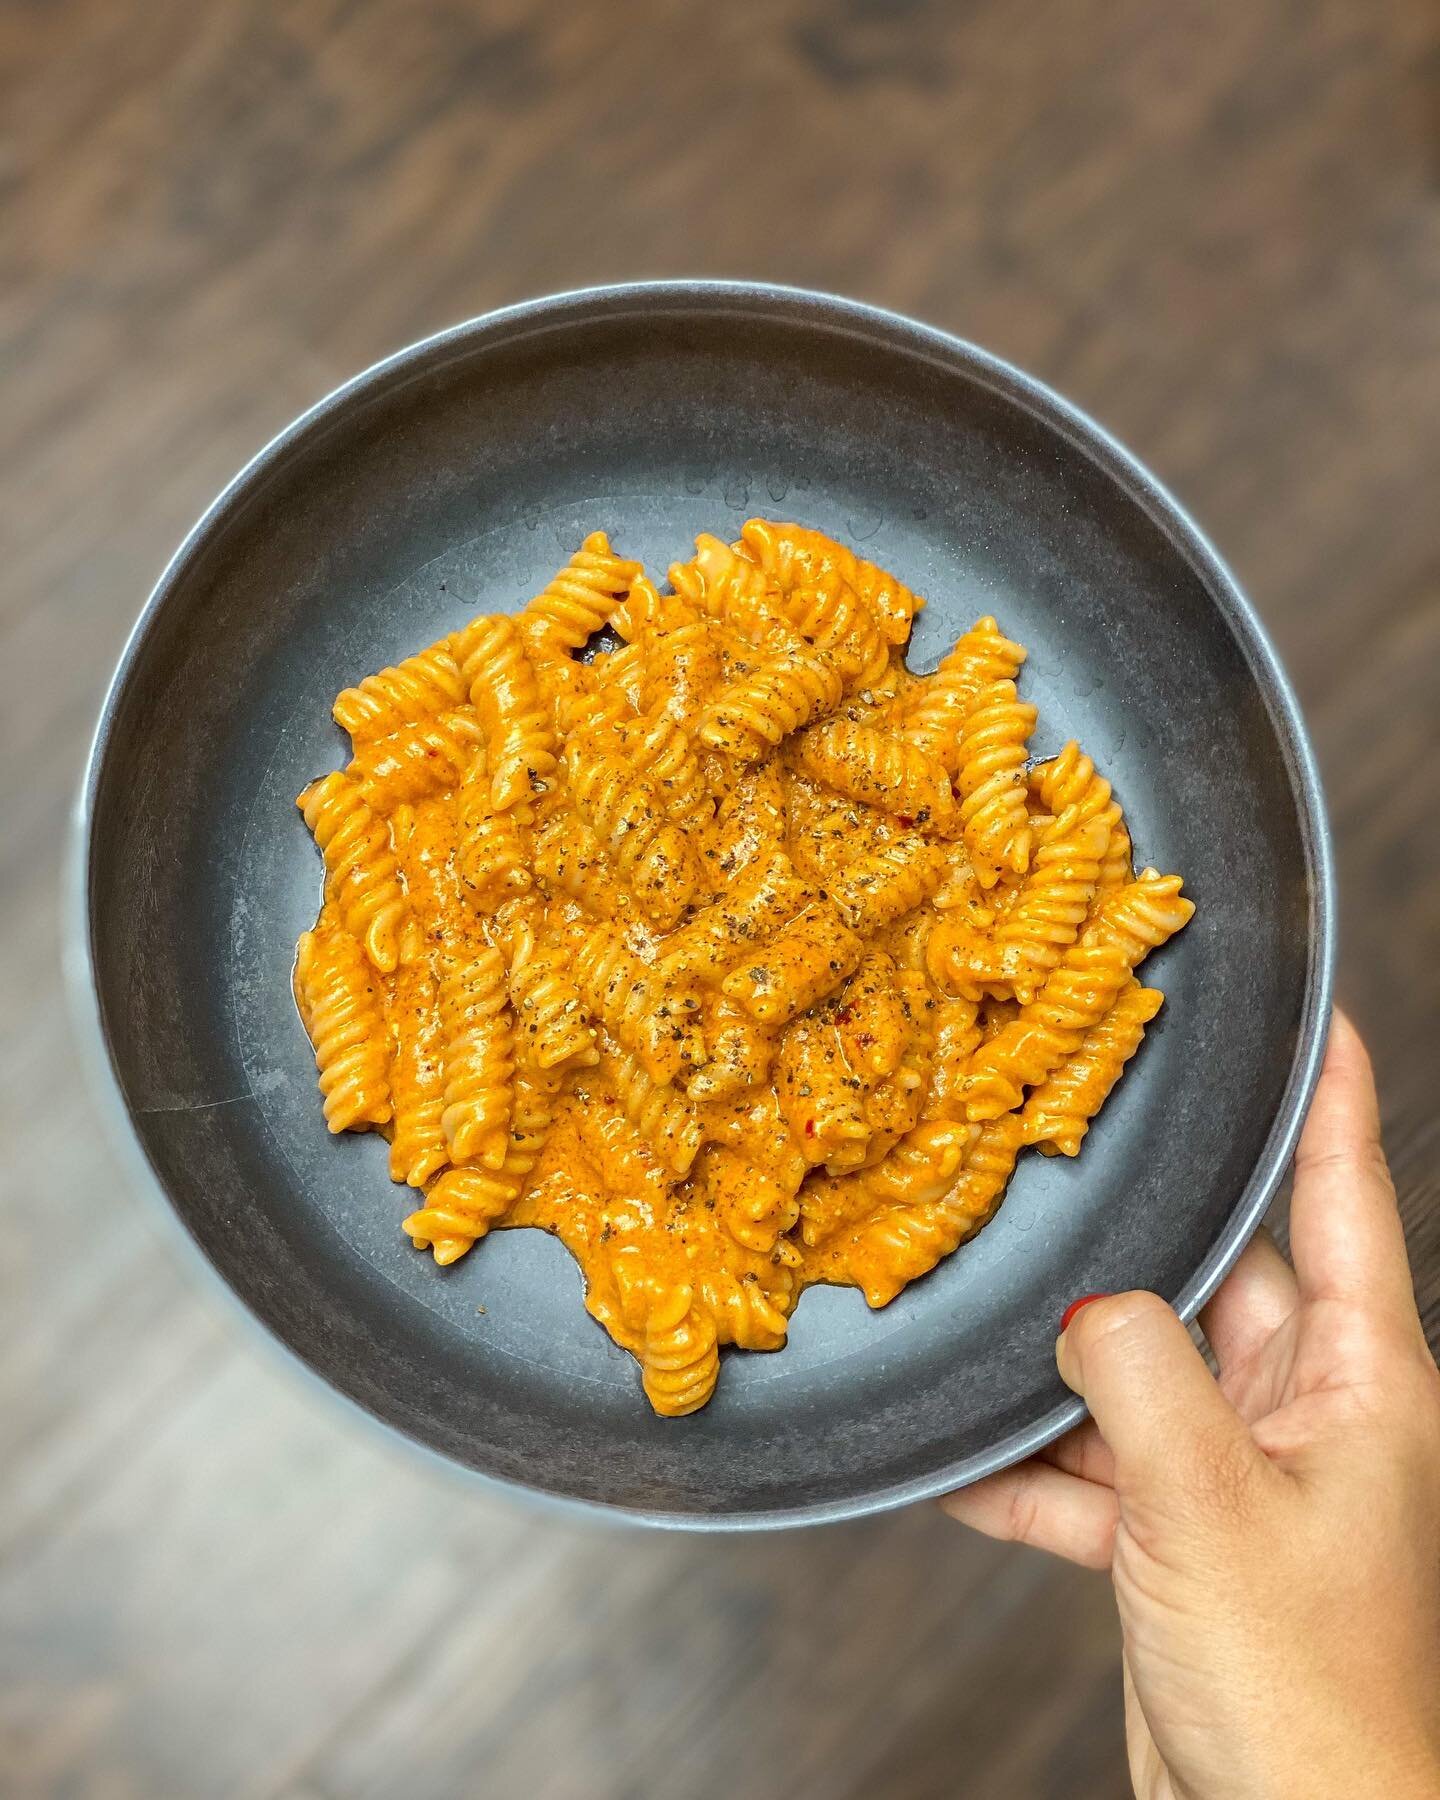 Still dreaming about this spicy vodka pasta that&rsquo;s gluten and dairy free! Super creamy with just a hint of spice and best of all, it&rsquo;s so simple to make! Recipe below ⬇️⬇️⬇️
&bull;
1/2 shallot, diced
1 tsp minced garlic
3/4 cup tomato pas